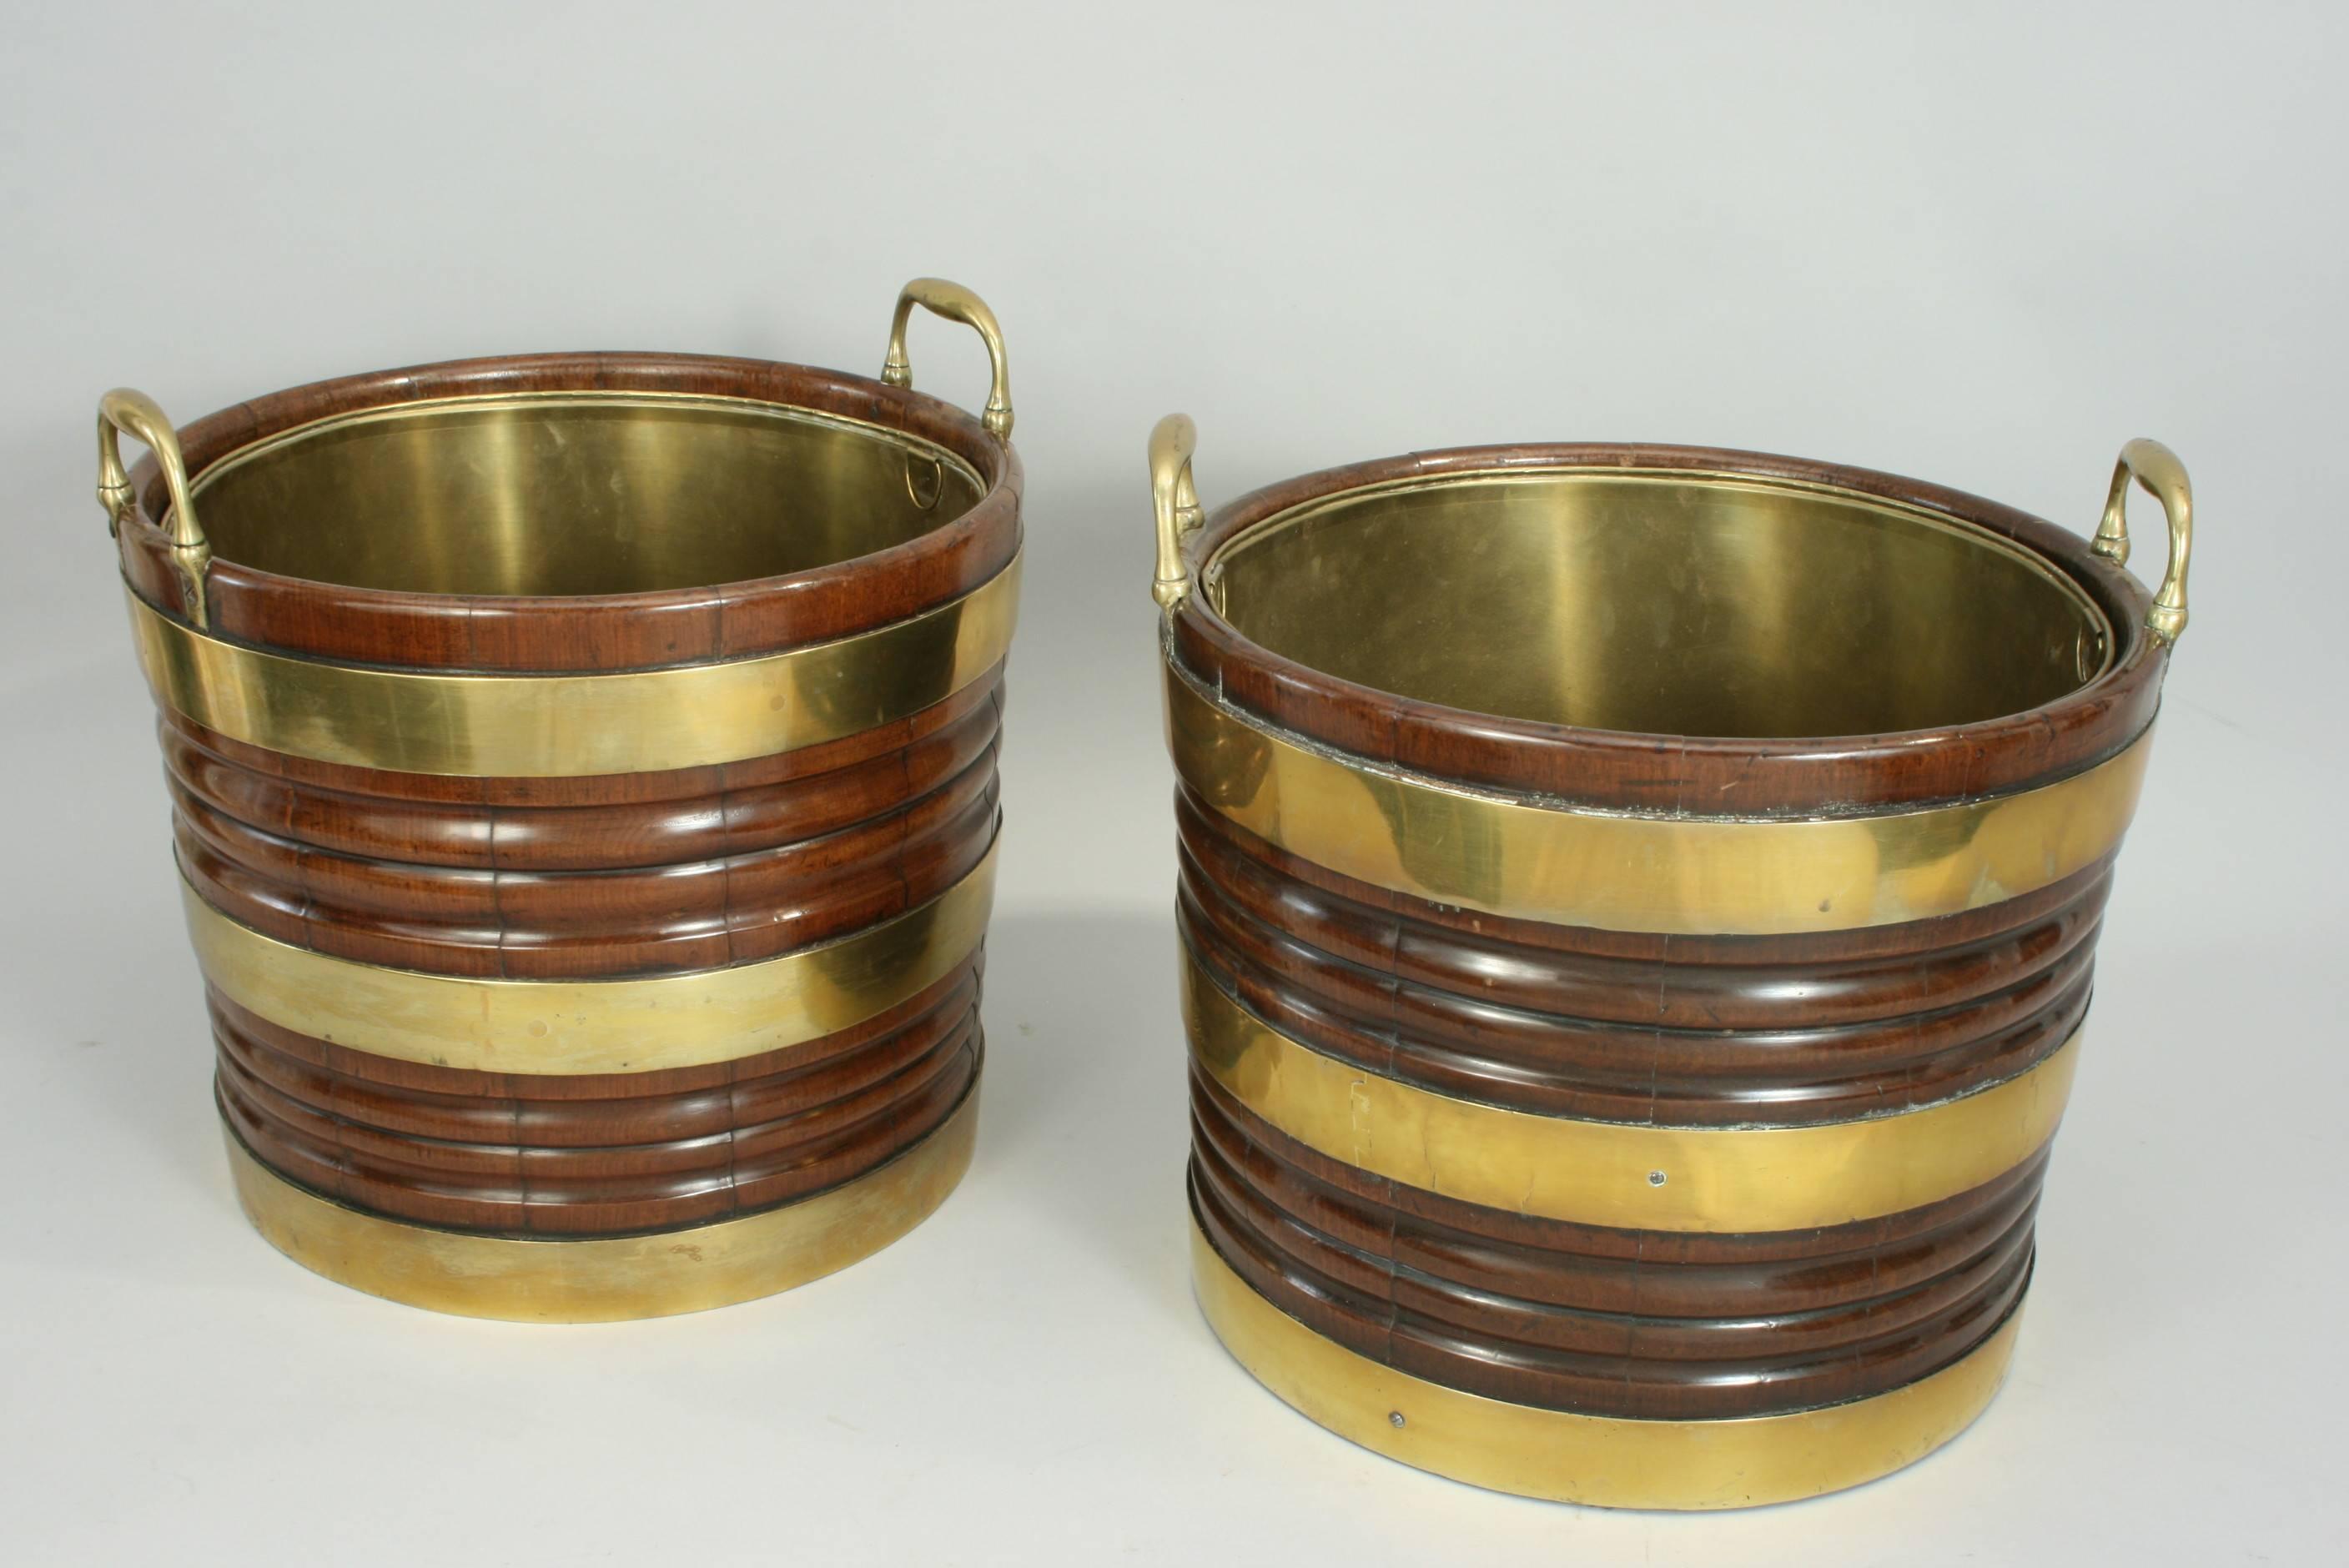 Irish mahogany peat buckets.
A very rare pair of good quality brass-bound mahogany peat buckets in original color and good patina. Each bucket is of a coopered construction with ribbed bodies, a slightly tapering circular shape, three brass bands,